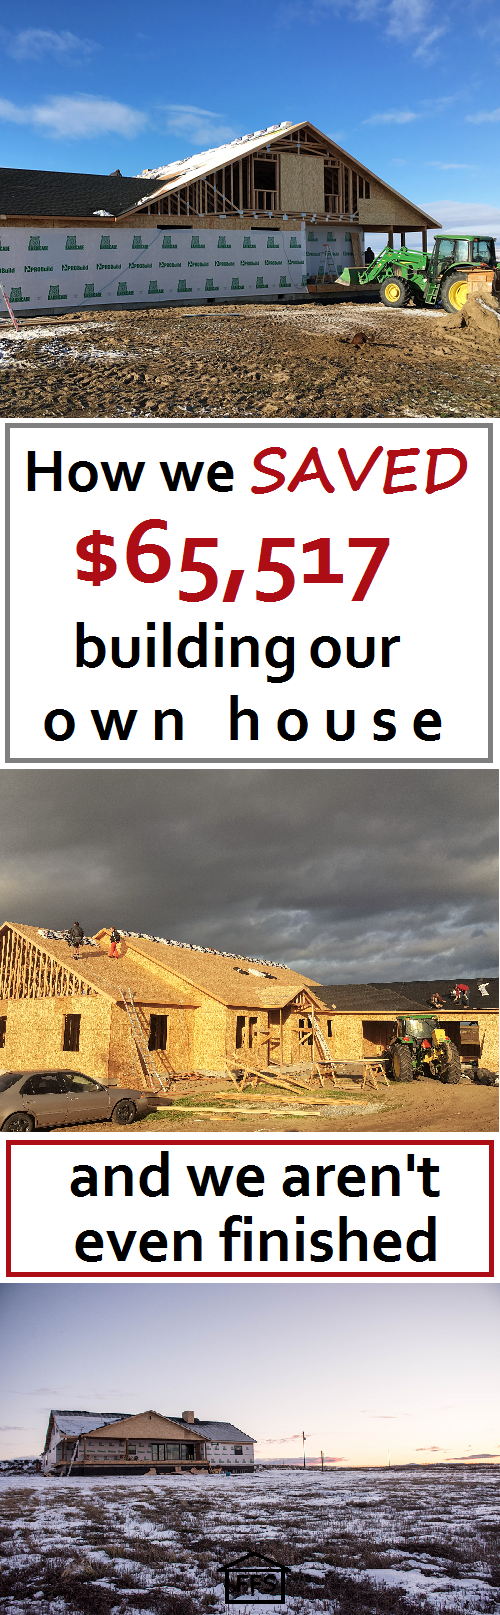 How we saved $65,517 building our own house, and we aren't even finished yet. How to build your own house and save thousands